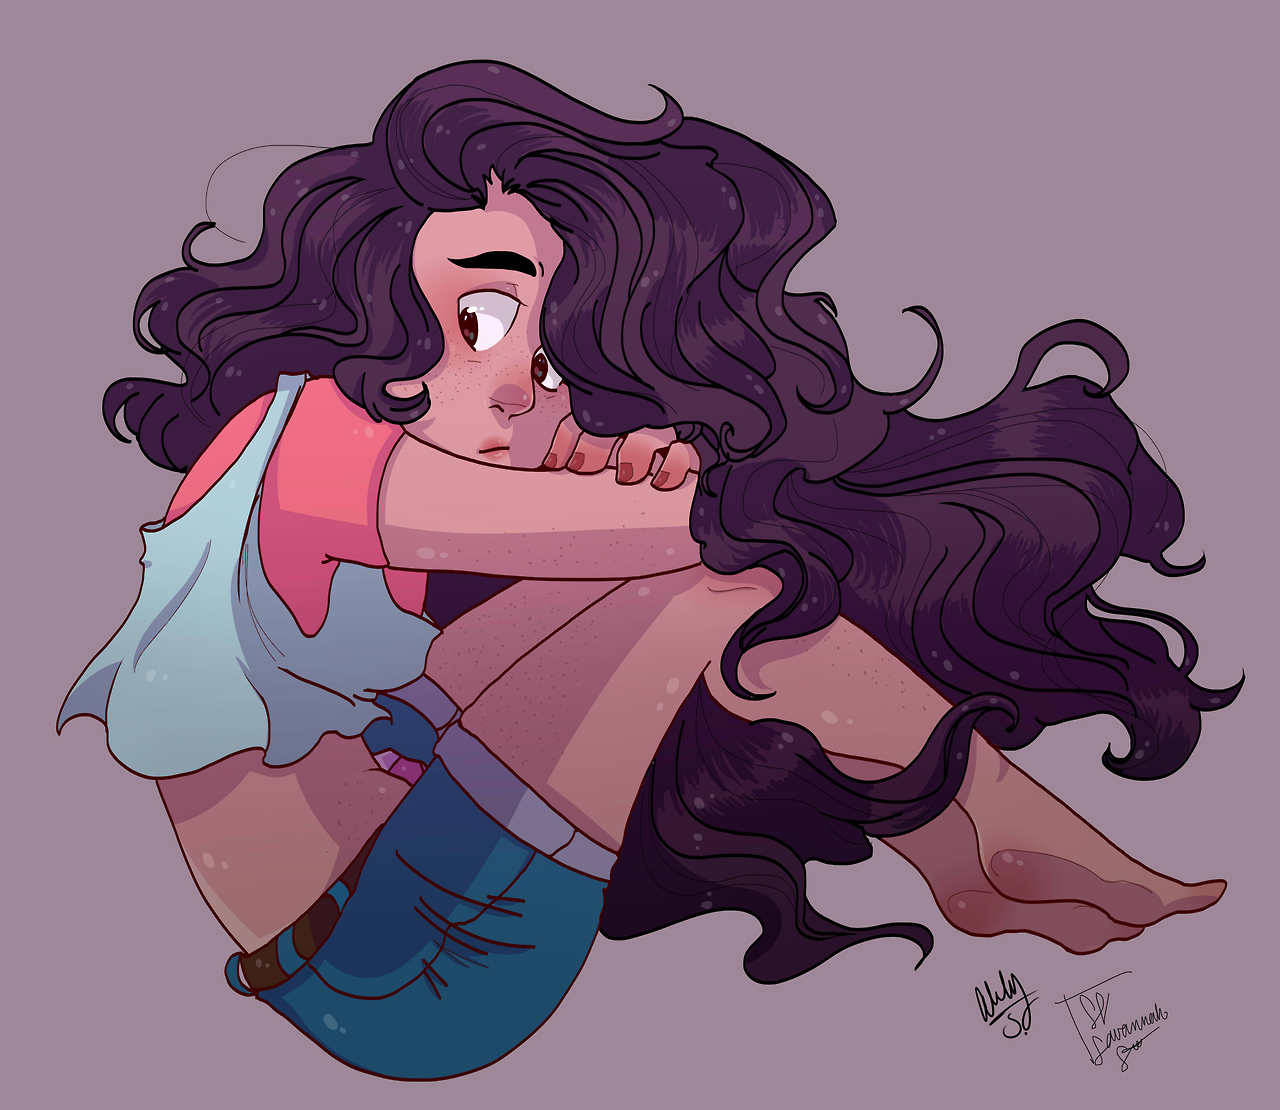 A Stevonnie collab an acquaintance and I did. She really wanted to collab with me, so I agreed because her work is absolutely gorgeous. She did the line work, and I colored/shaded.